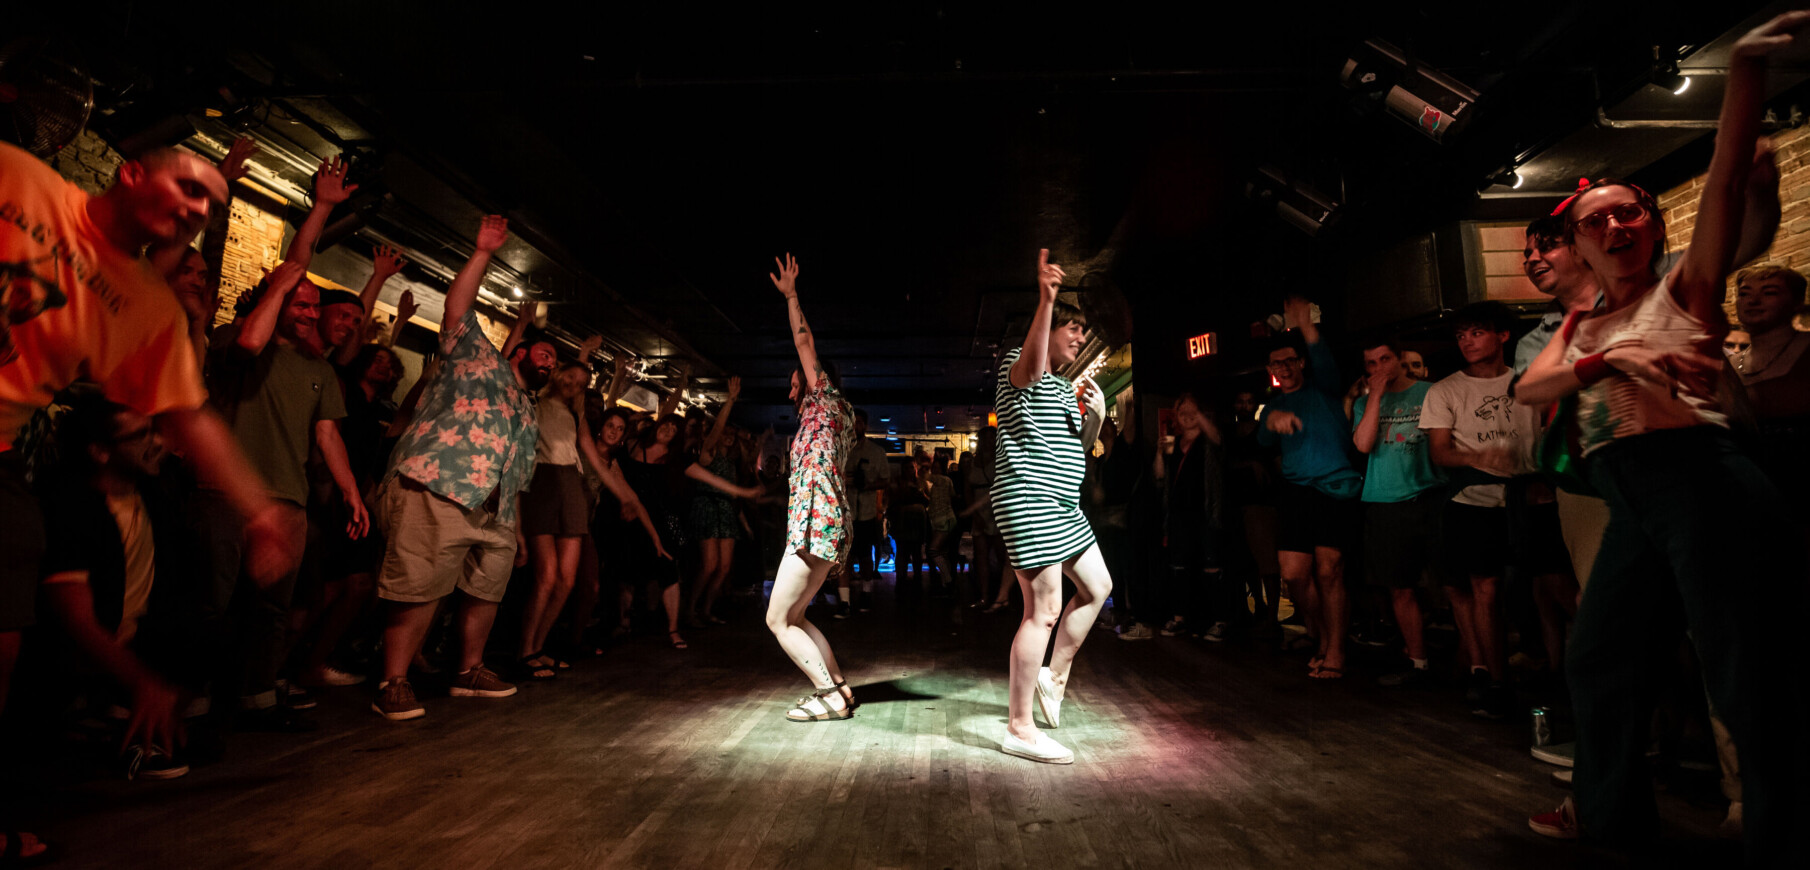 two light skinned women dance under a spotlight as a crowd watches in a darkened room